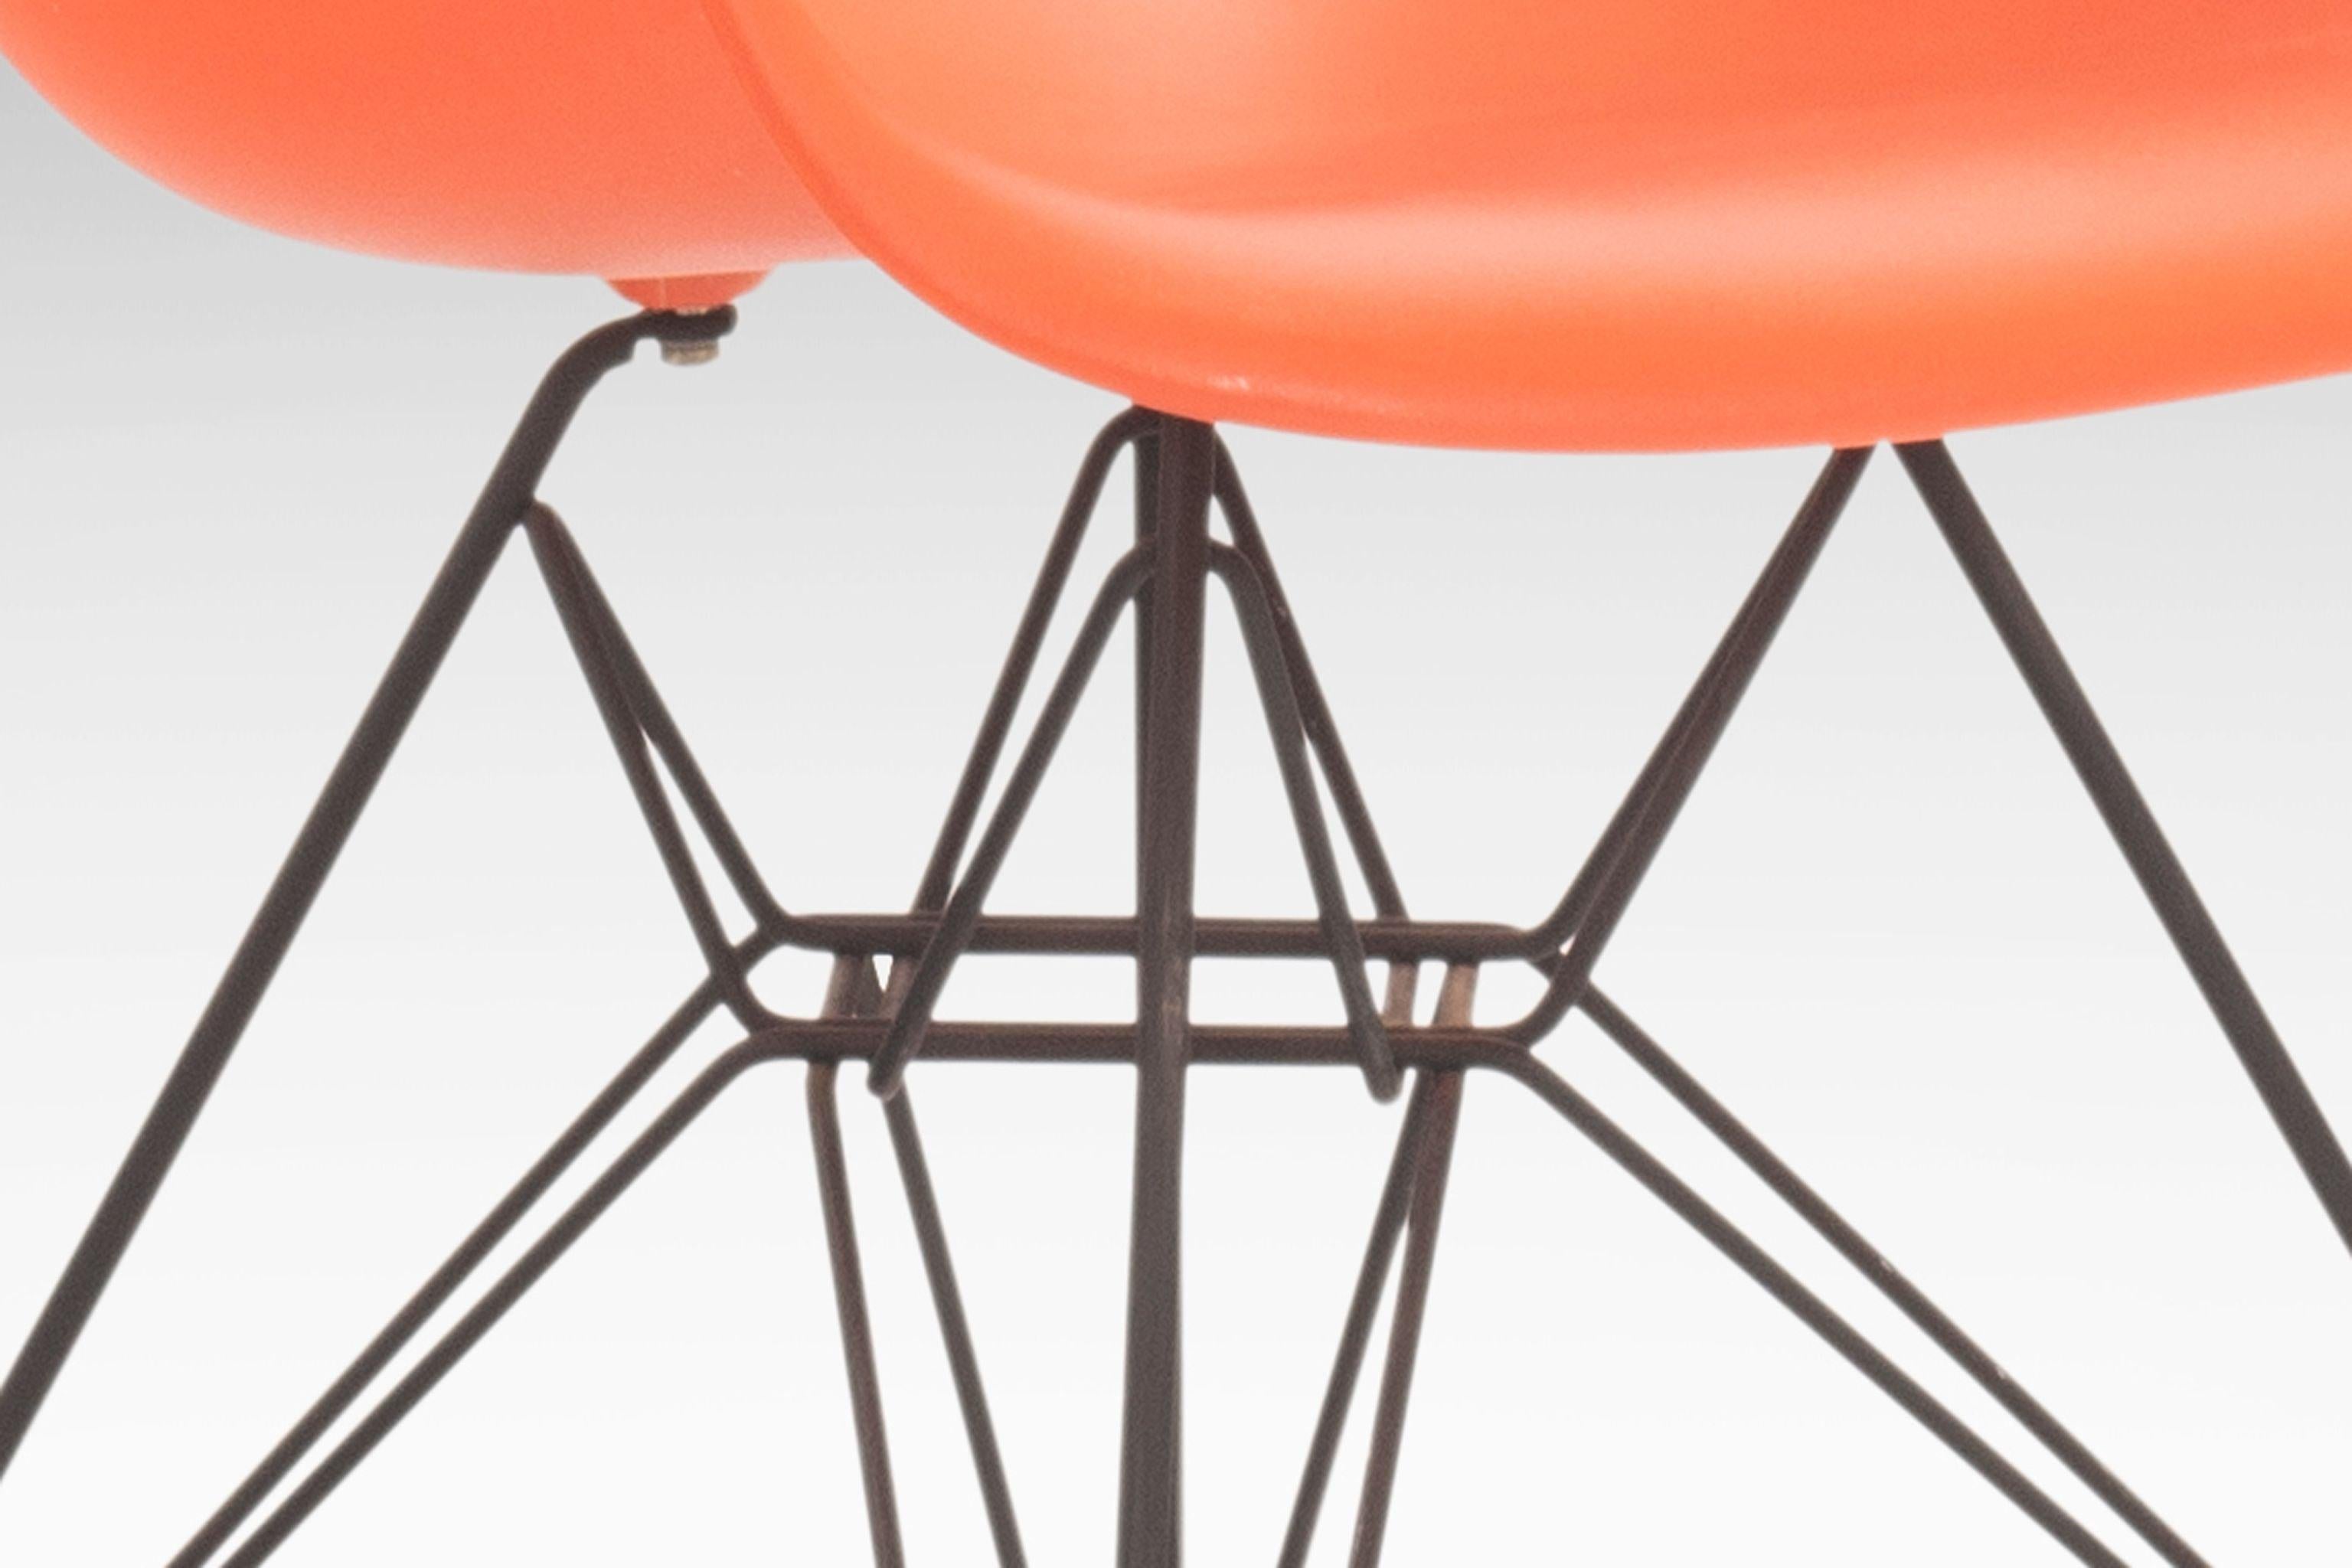 Quite possibly one of the most famous and iconic chairs ever, the Eames DAR model would most commonly become known as the ‘Eiffel Chair’ due to its sculptured wire base resembling that of Europe’s most famous landmark. Designed in 1950 by the Eames